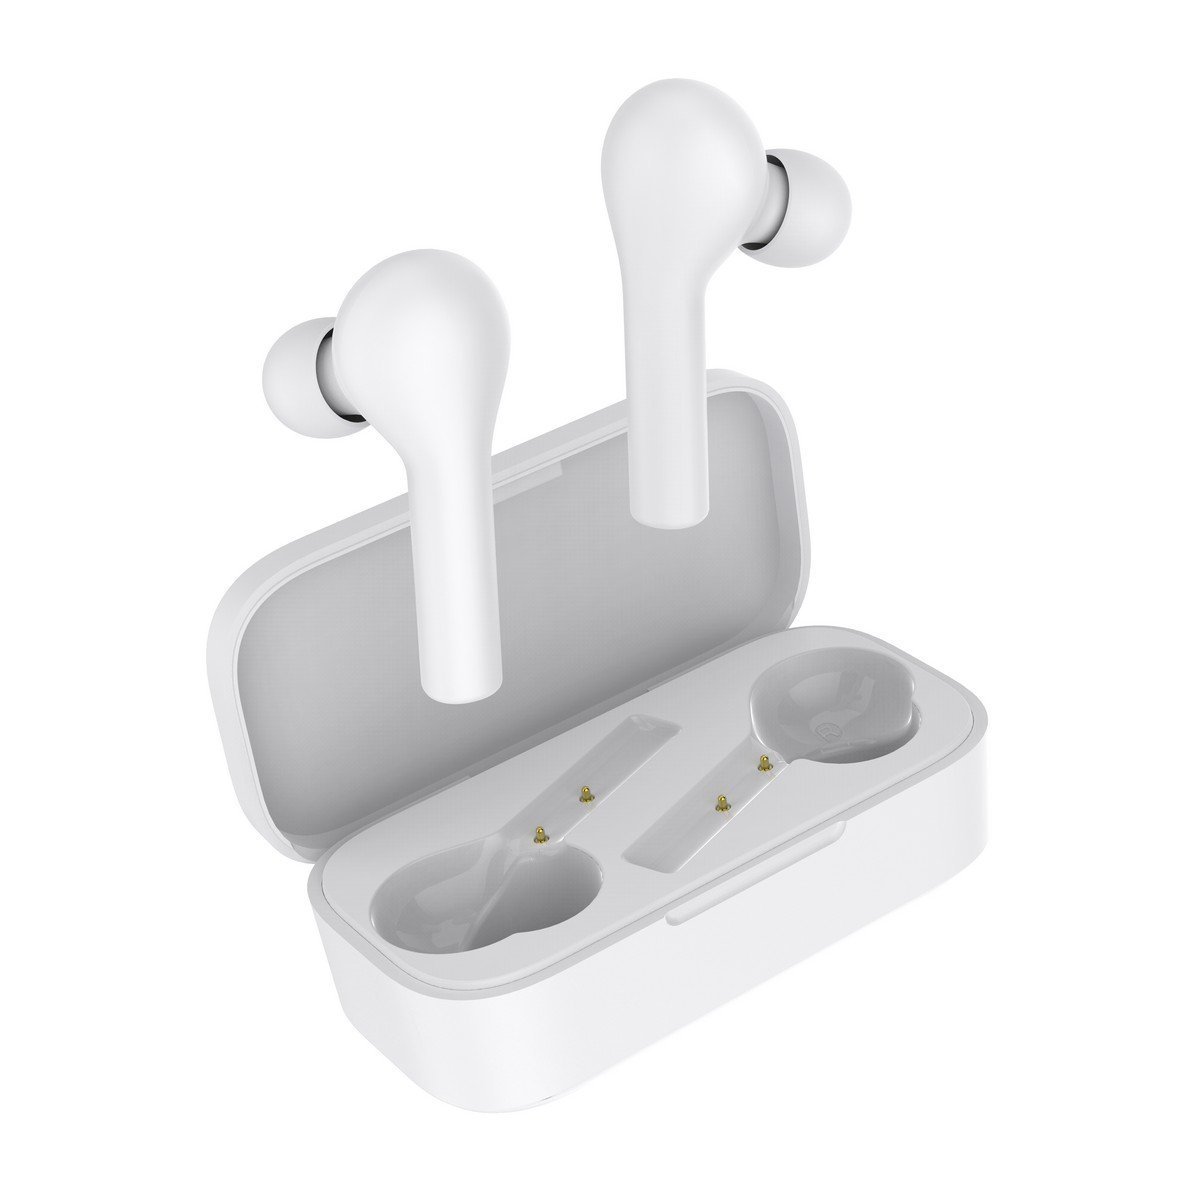 Casti in-Ear QCY T5 TWS, Alb, Wireless, Bluetooth 5.0, Control touch, Baterie 380 mAh Xkids